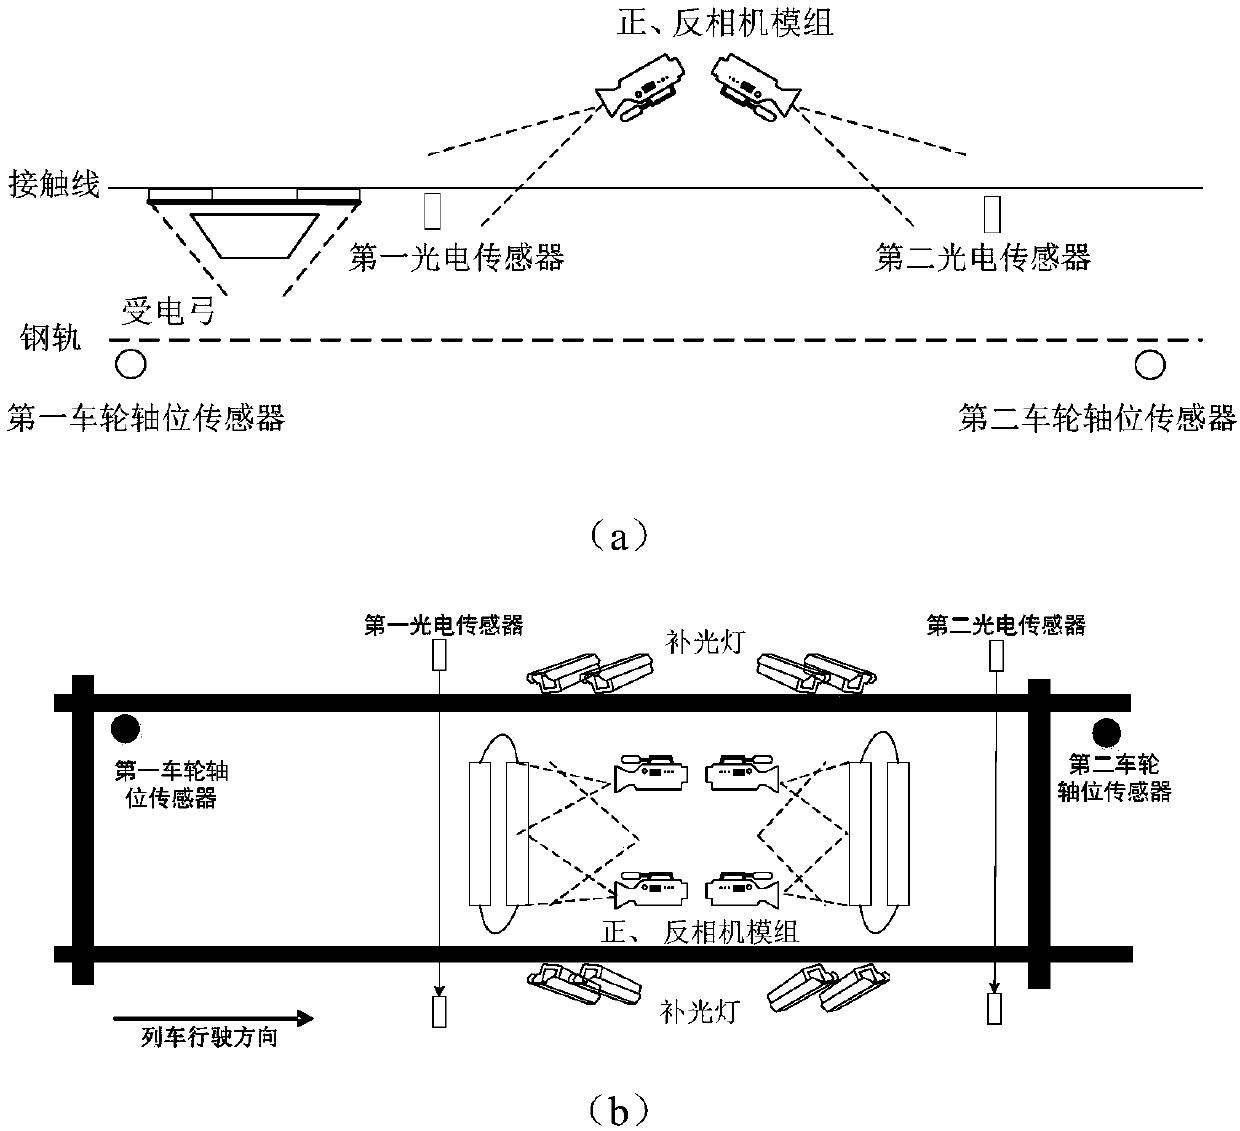 Online detection device and method for abrasion of pantograph sliding plate based on images